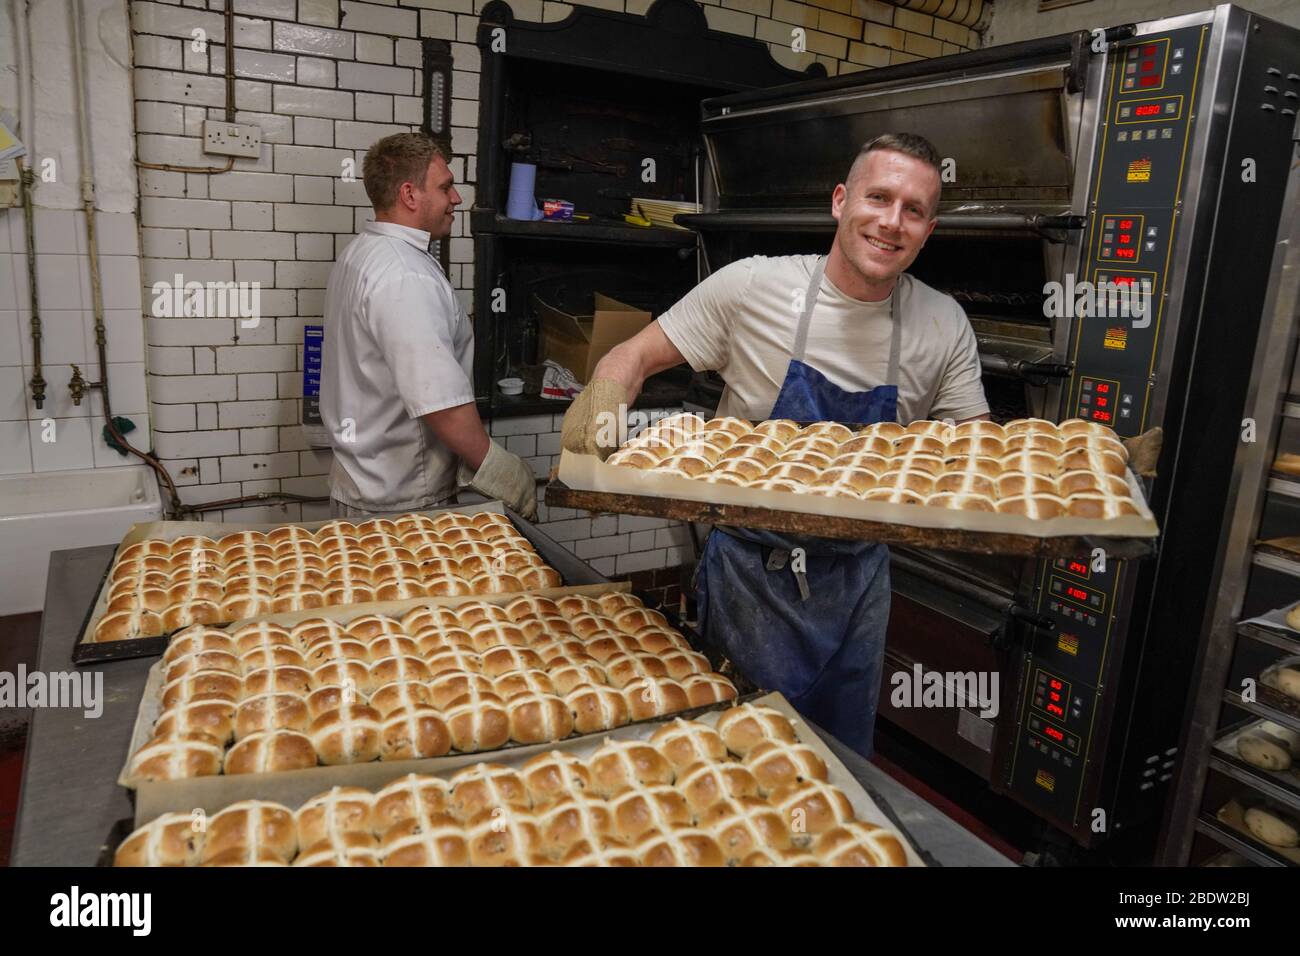 Cardiff, Wales, UK. 10th April 2020. During the Coronavirus outbreak Allens Bakery in Cardiff produces over 1200 hot cross buns to celebrate Good Friday. Credit: Haydn Denman/Alamy Live News. Stock Photo